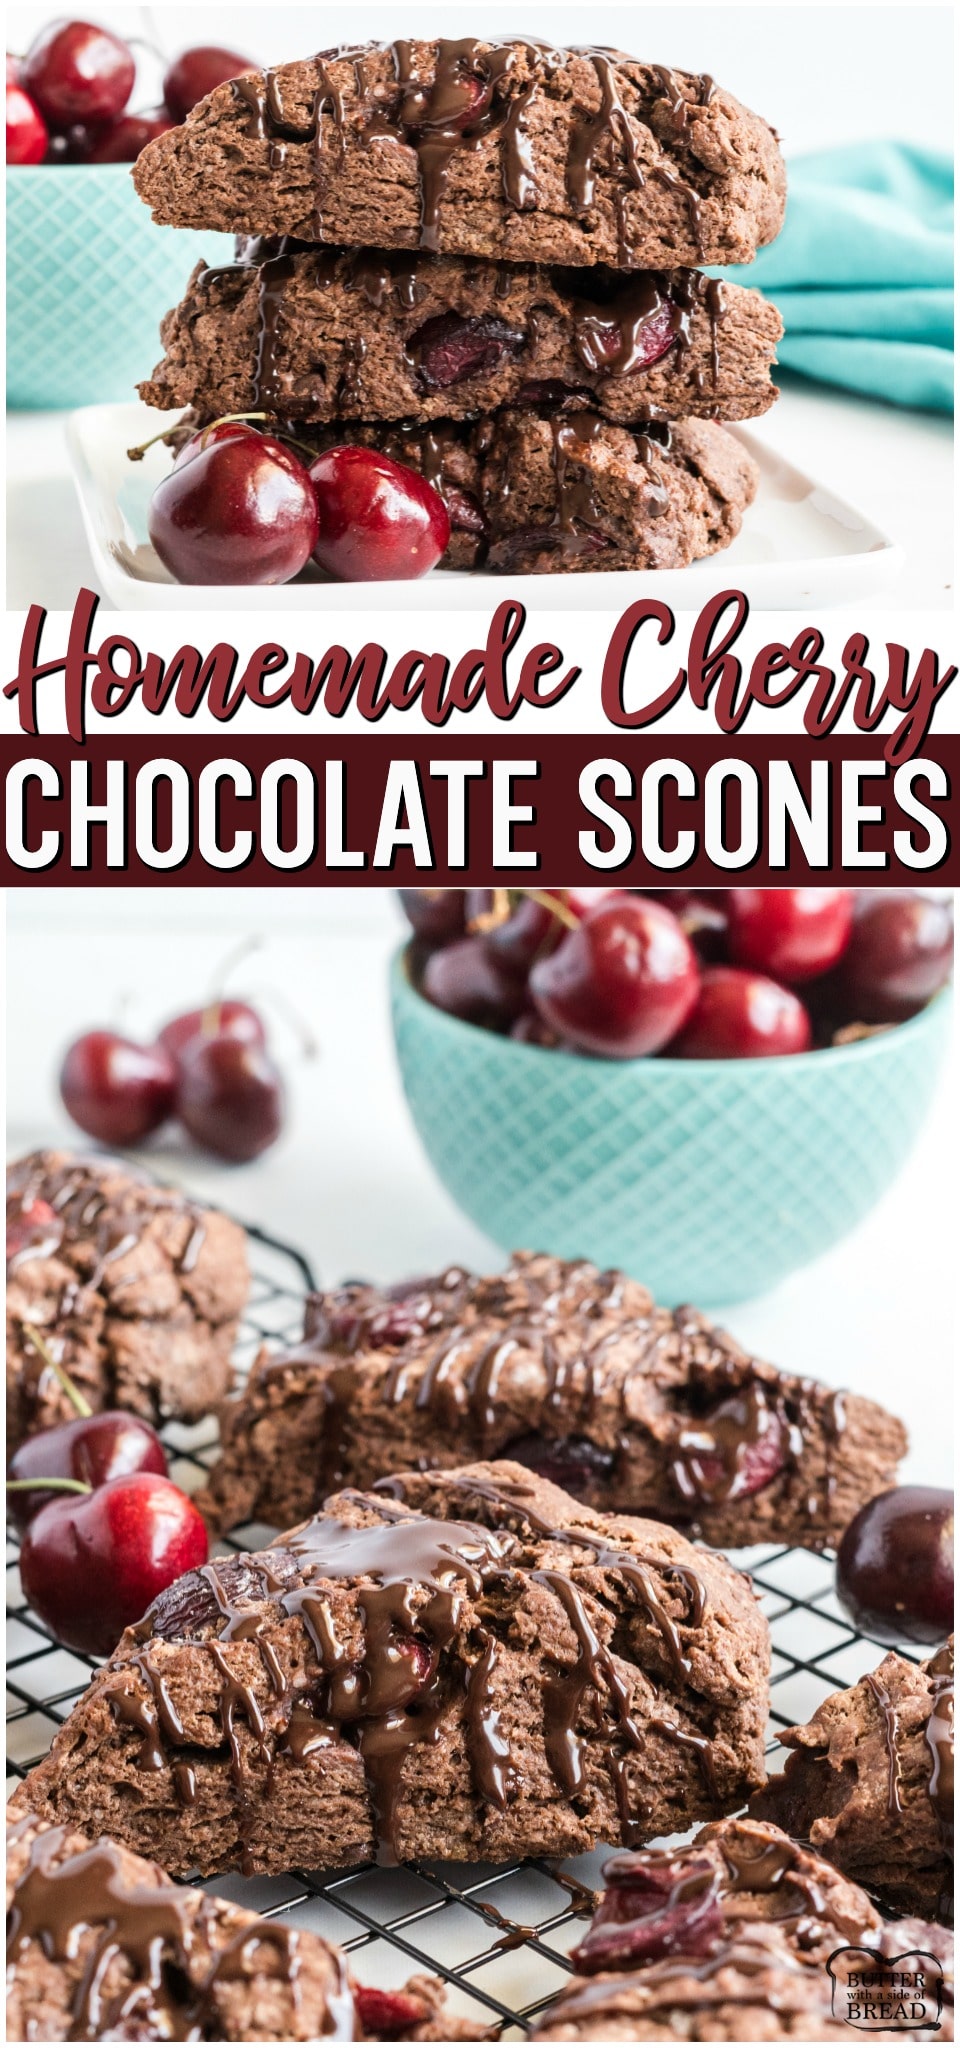 Cherry Chocolate Scones made with fresh cherries & dark chocolate for a perfect soft, sweet chocolate scone. Soft & flavorful homemade scone recipe great for breakfast or a treat!